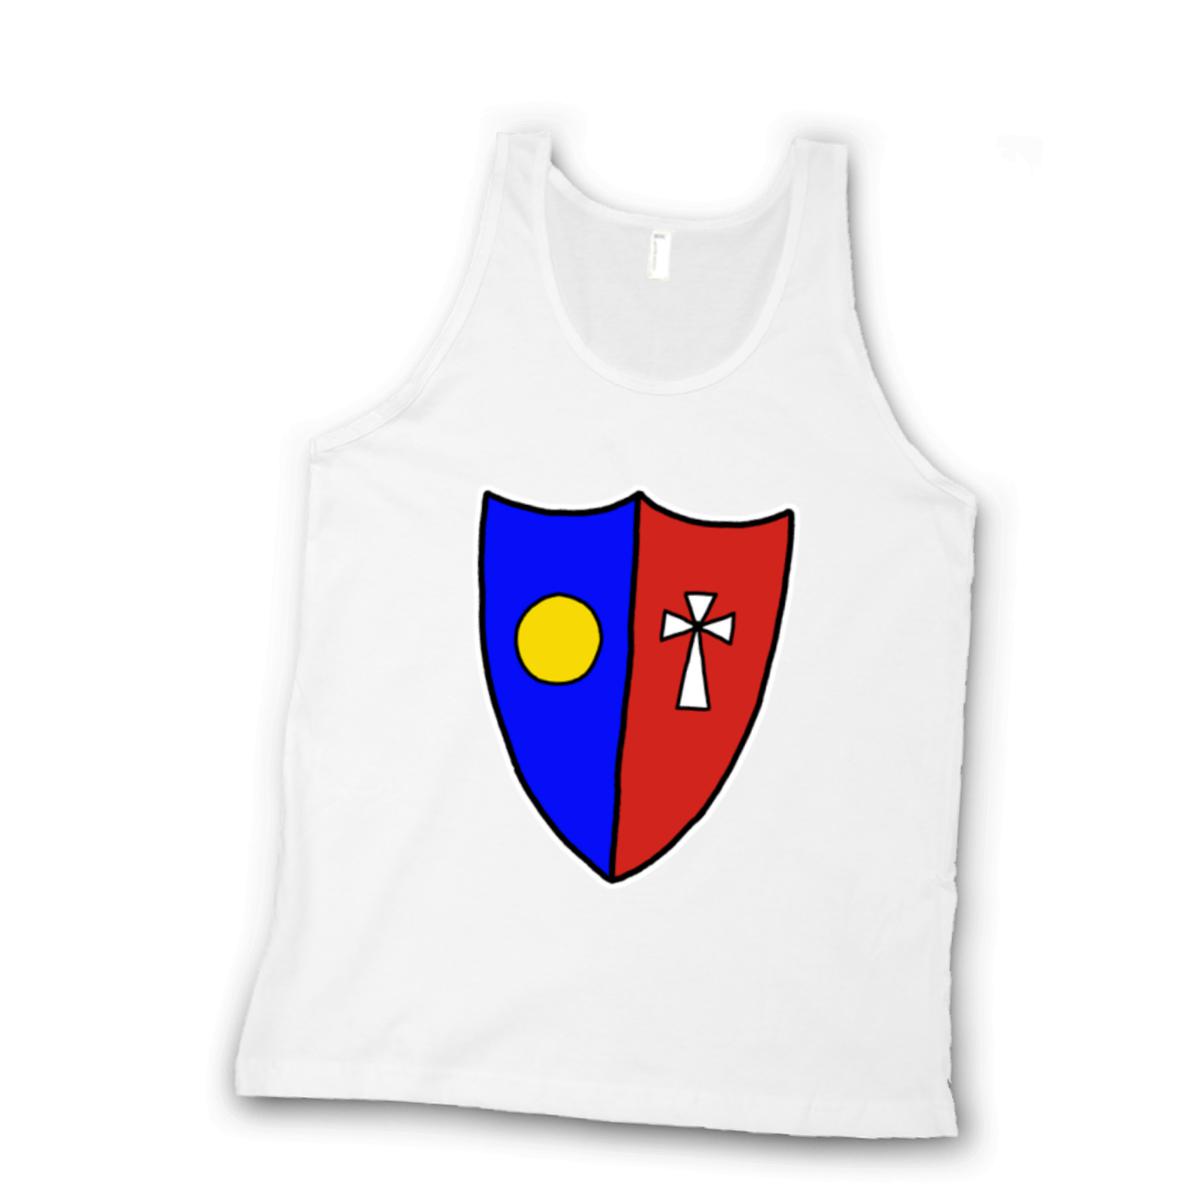 Shield Unisex Tank Top Extra Small white